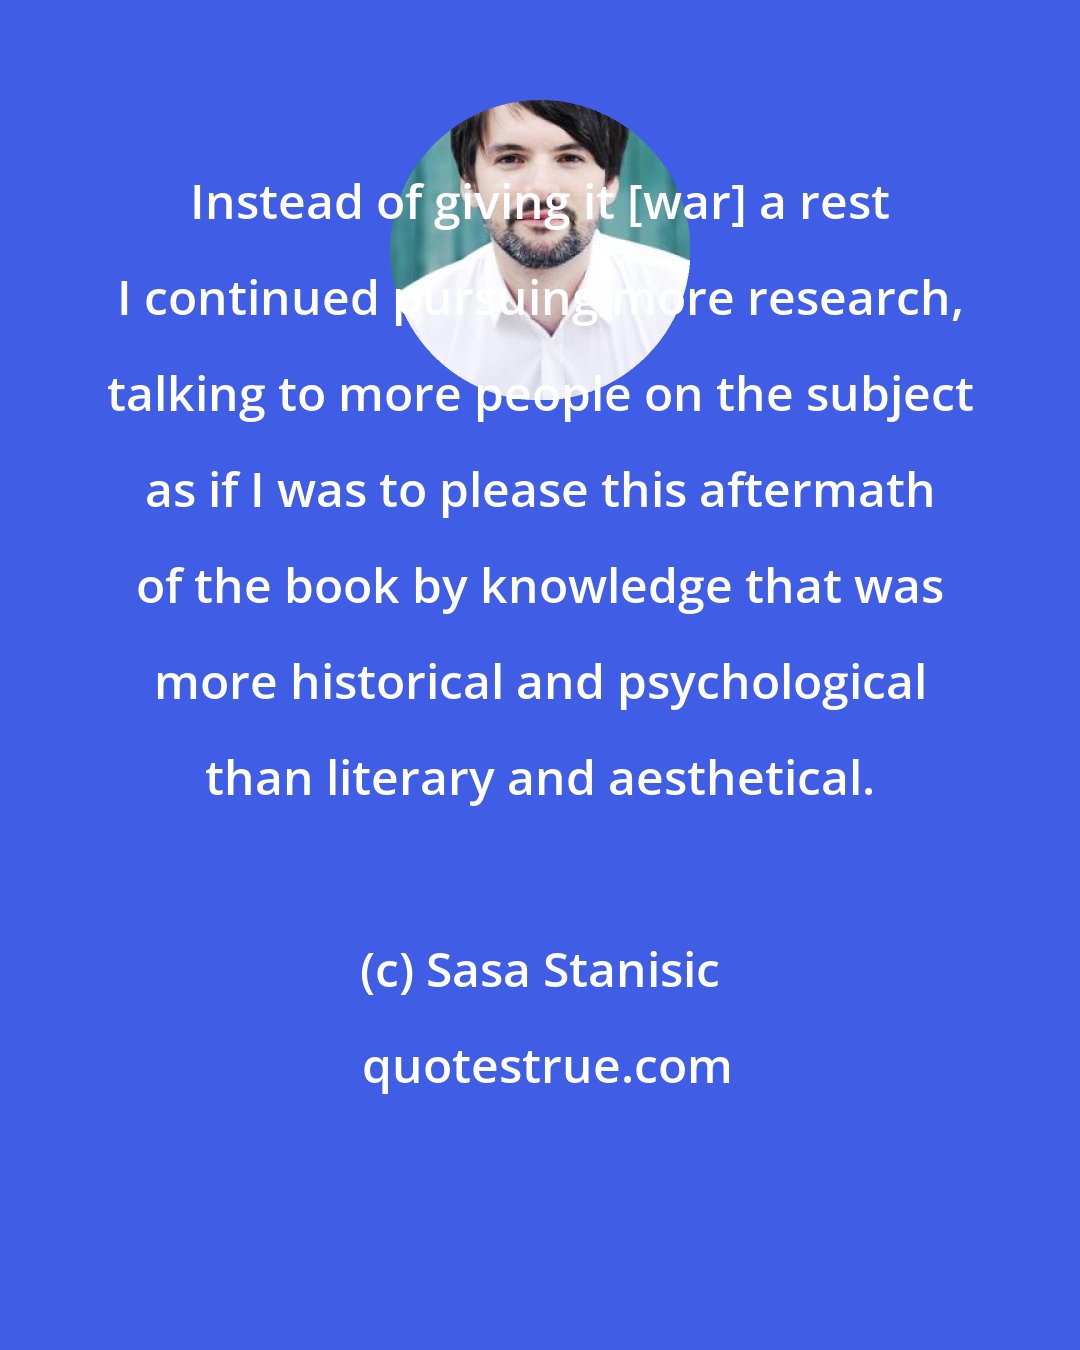 Sasa Stanisic: Instead of giving it [war] a rest I continued pursuing more research, talking to more people on the subject as if I was to please this aftermath of the book by knowledge that was more historical and psychological than literary and aesthetical.